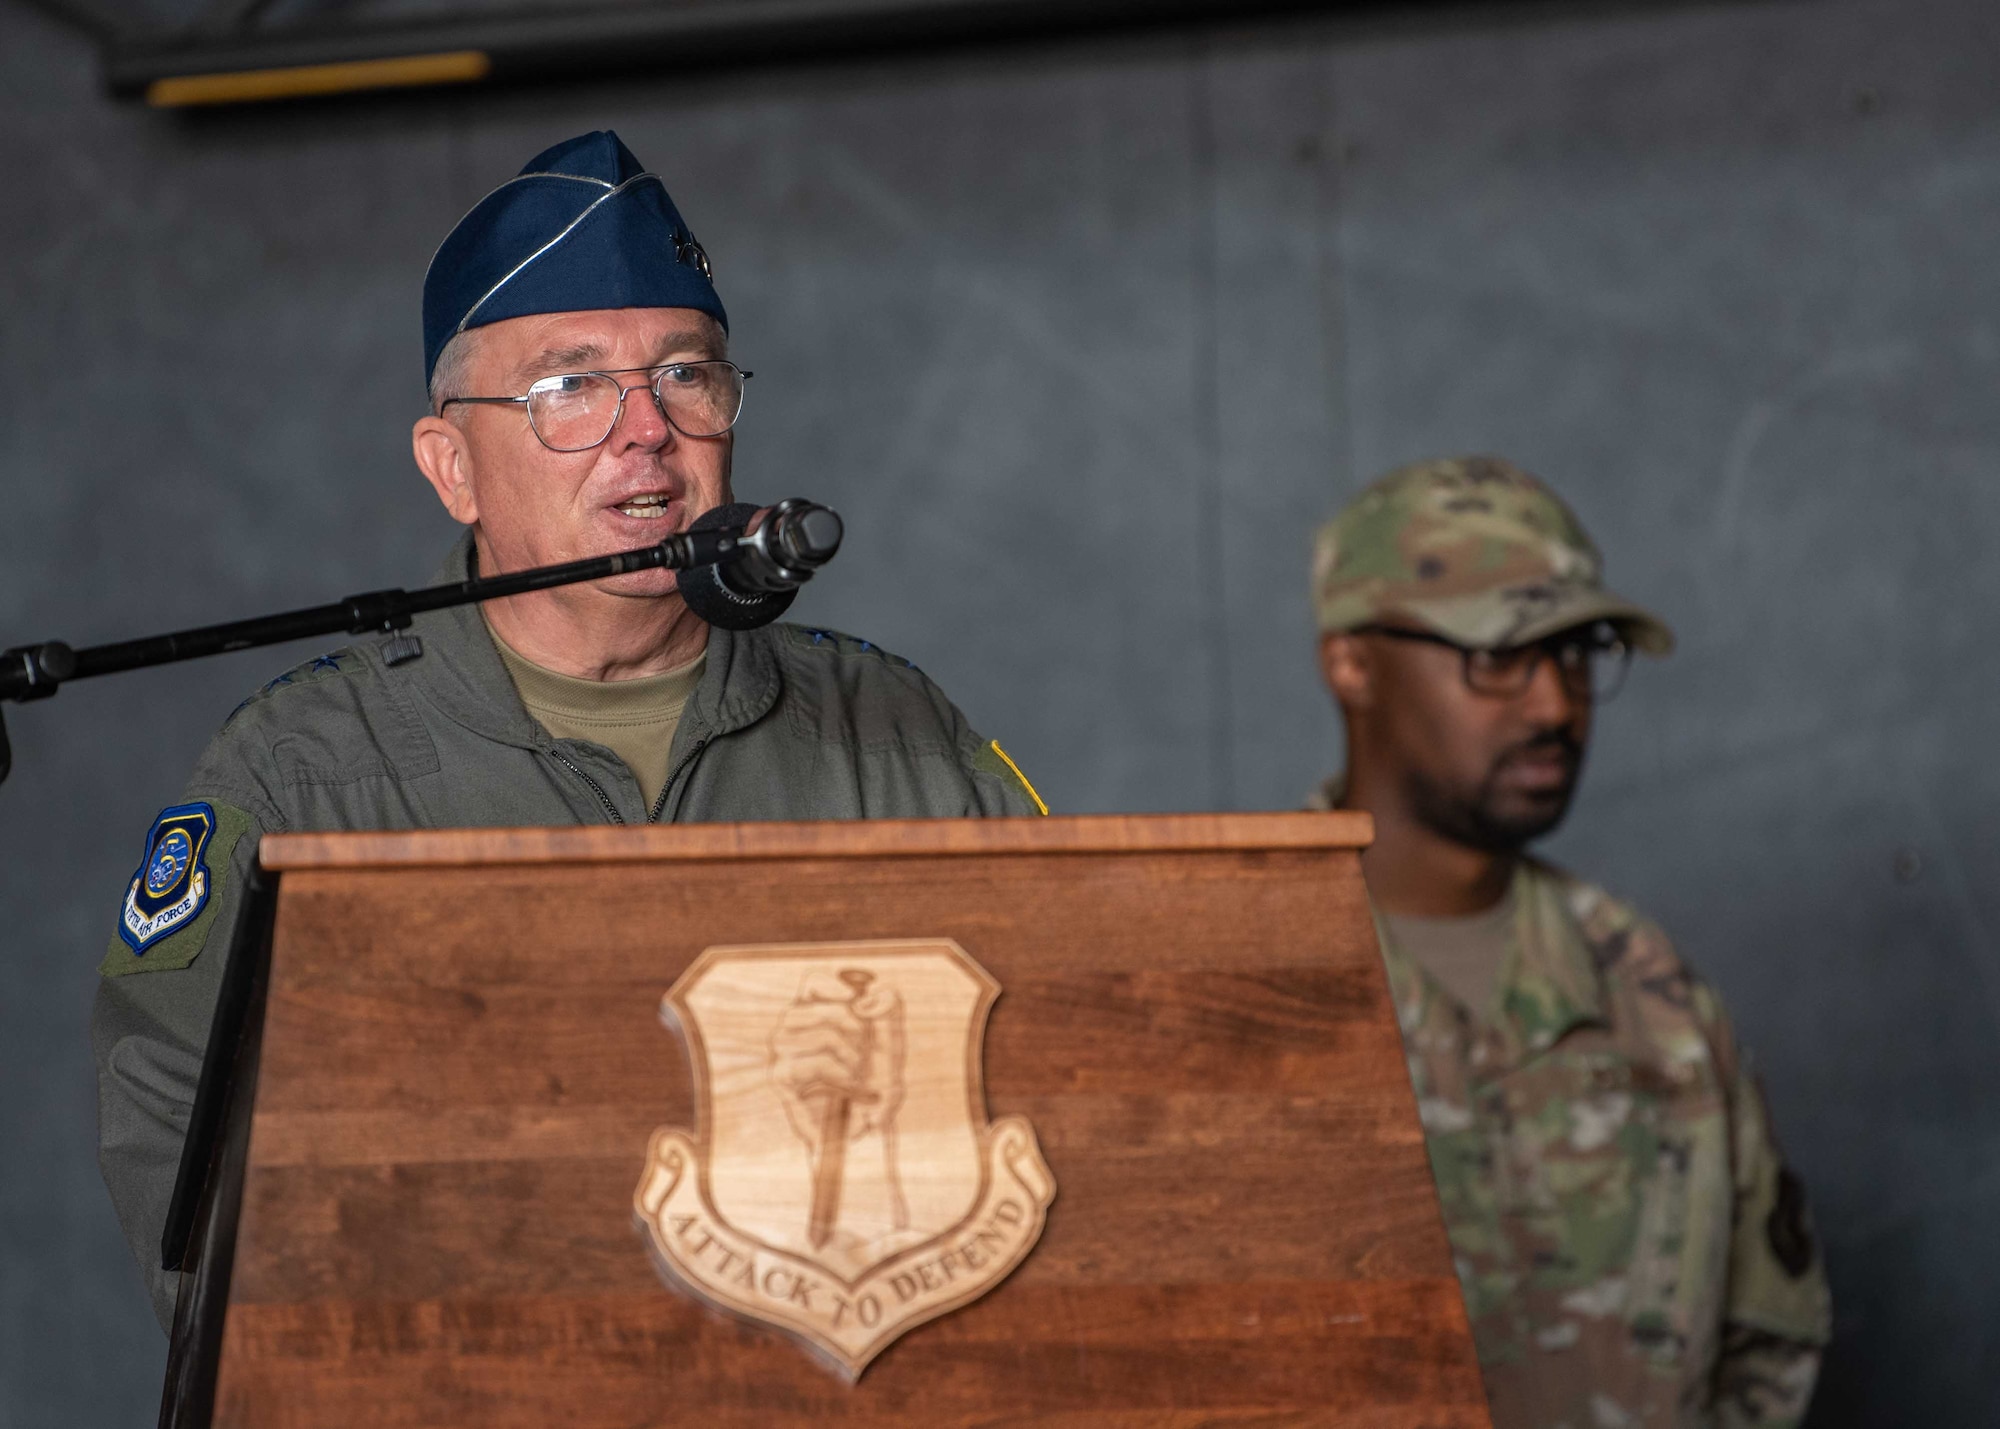 United States Air Force Lt. Gen. Ricky N. Rupp, U.S. Forces Japan and 5th Air Force commander, delivers a speech during the 35th Fighter Wing change of command ceremony at Misawa Air Base, Japan, June 30, 2022.